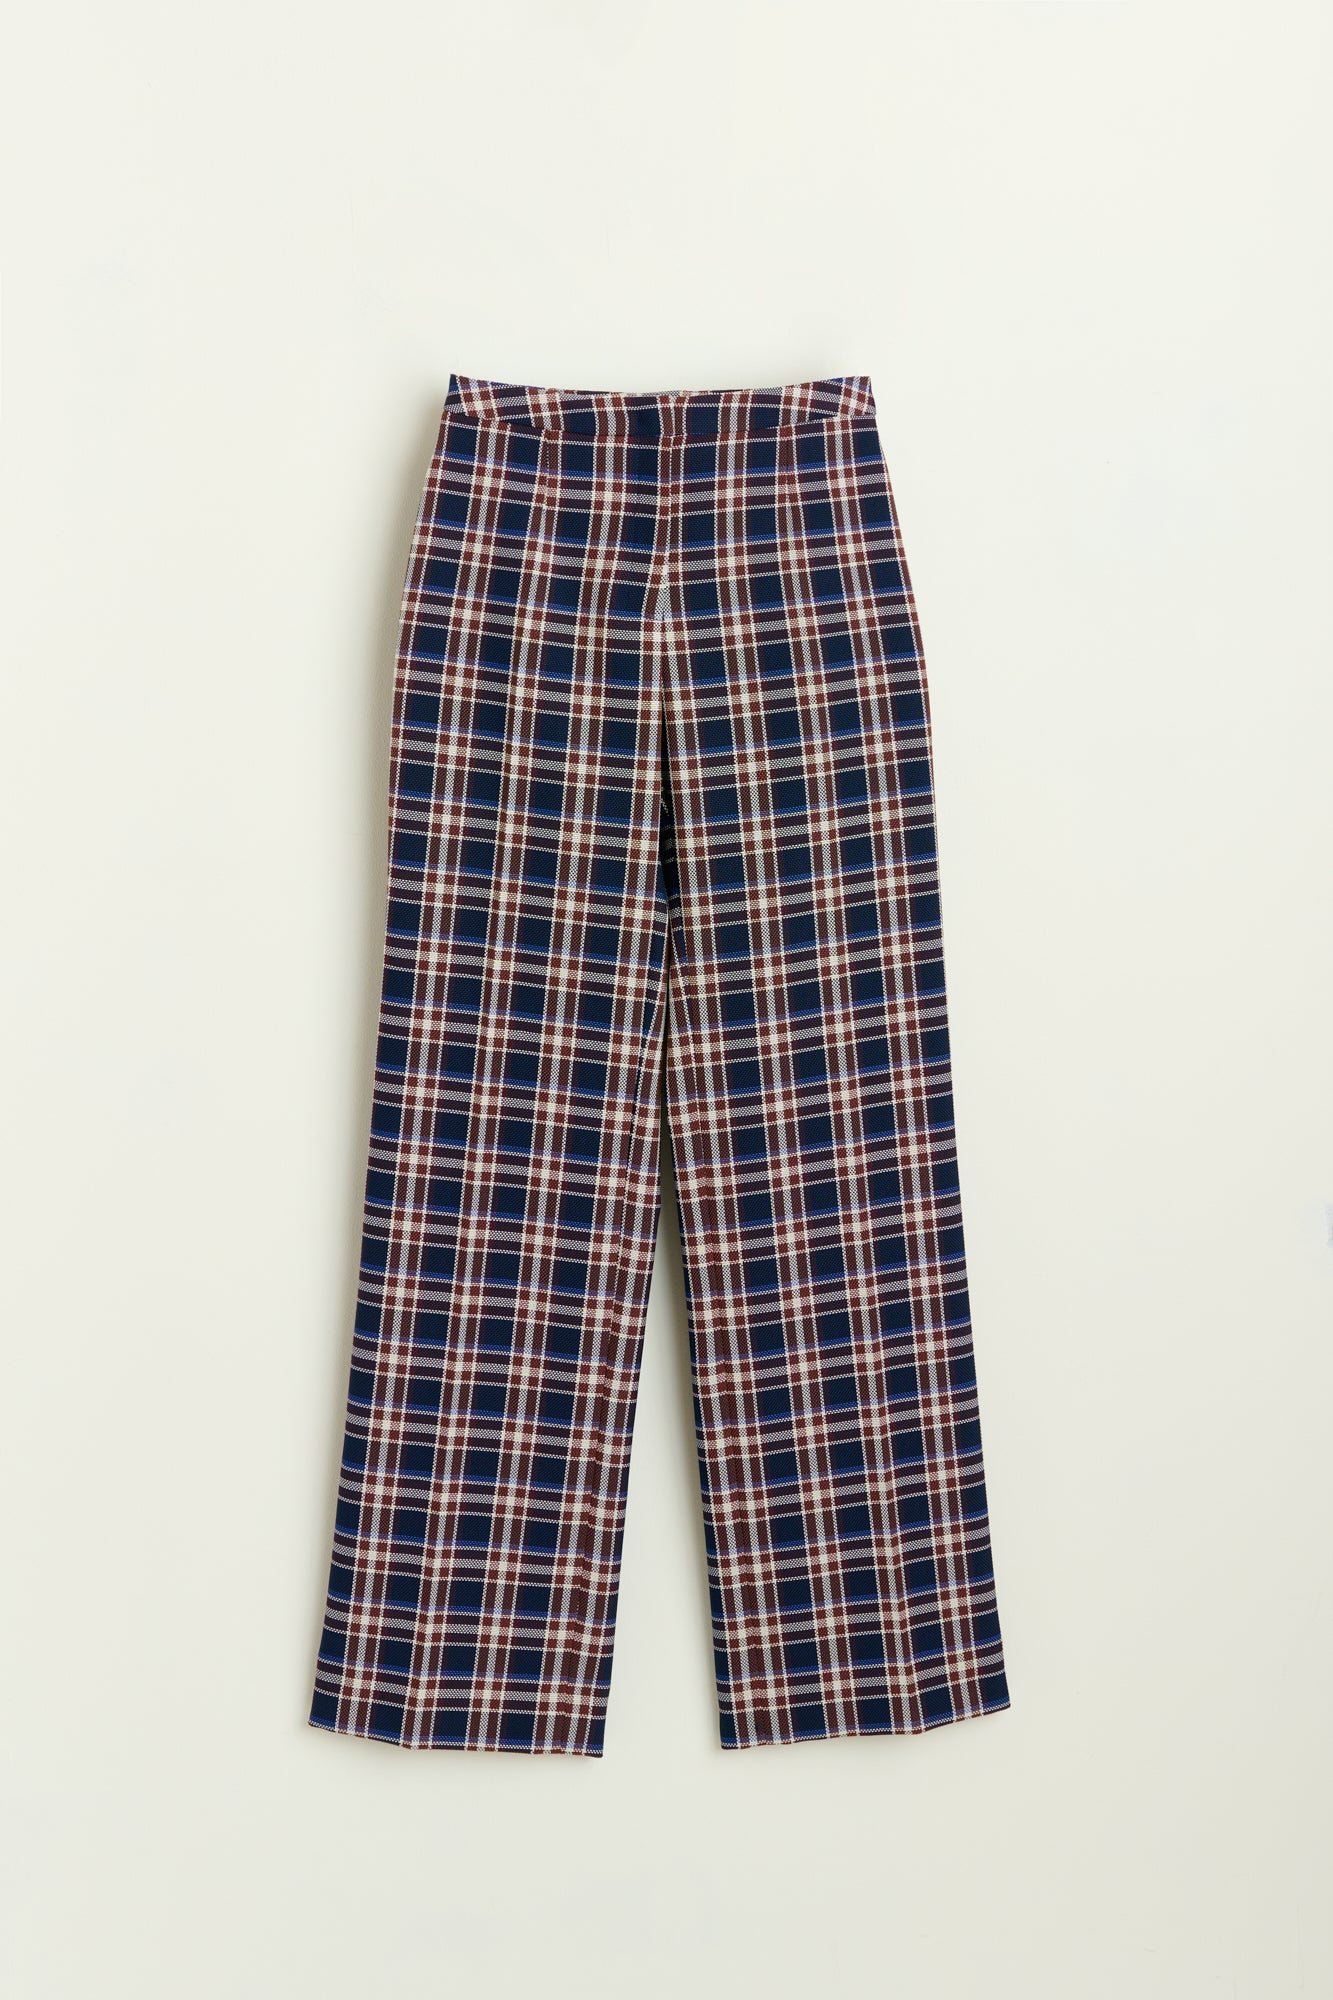 Natan Canvas Trousers with Checks in Navy Blue.jpg